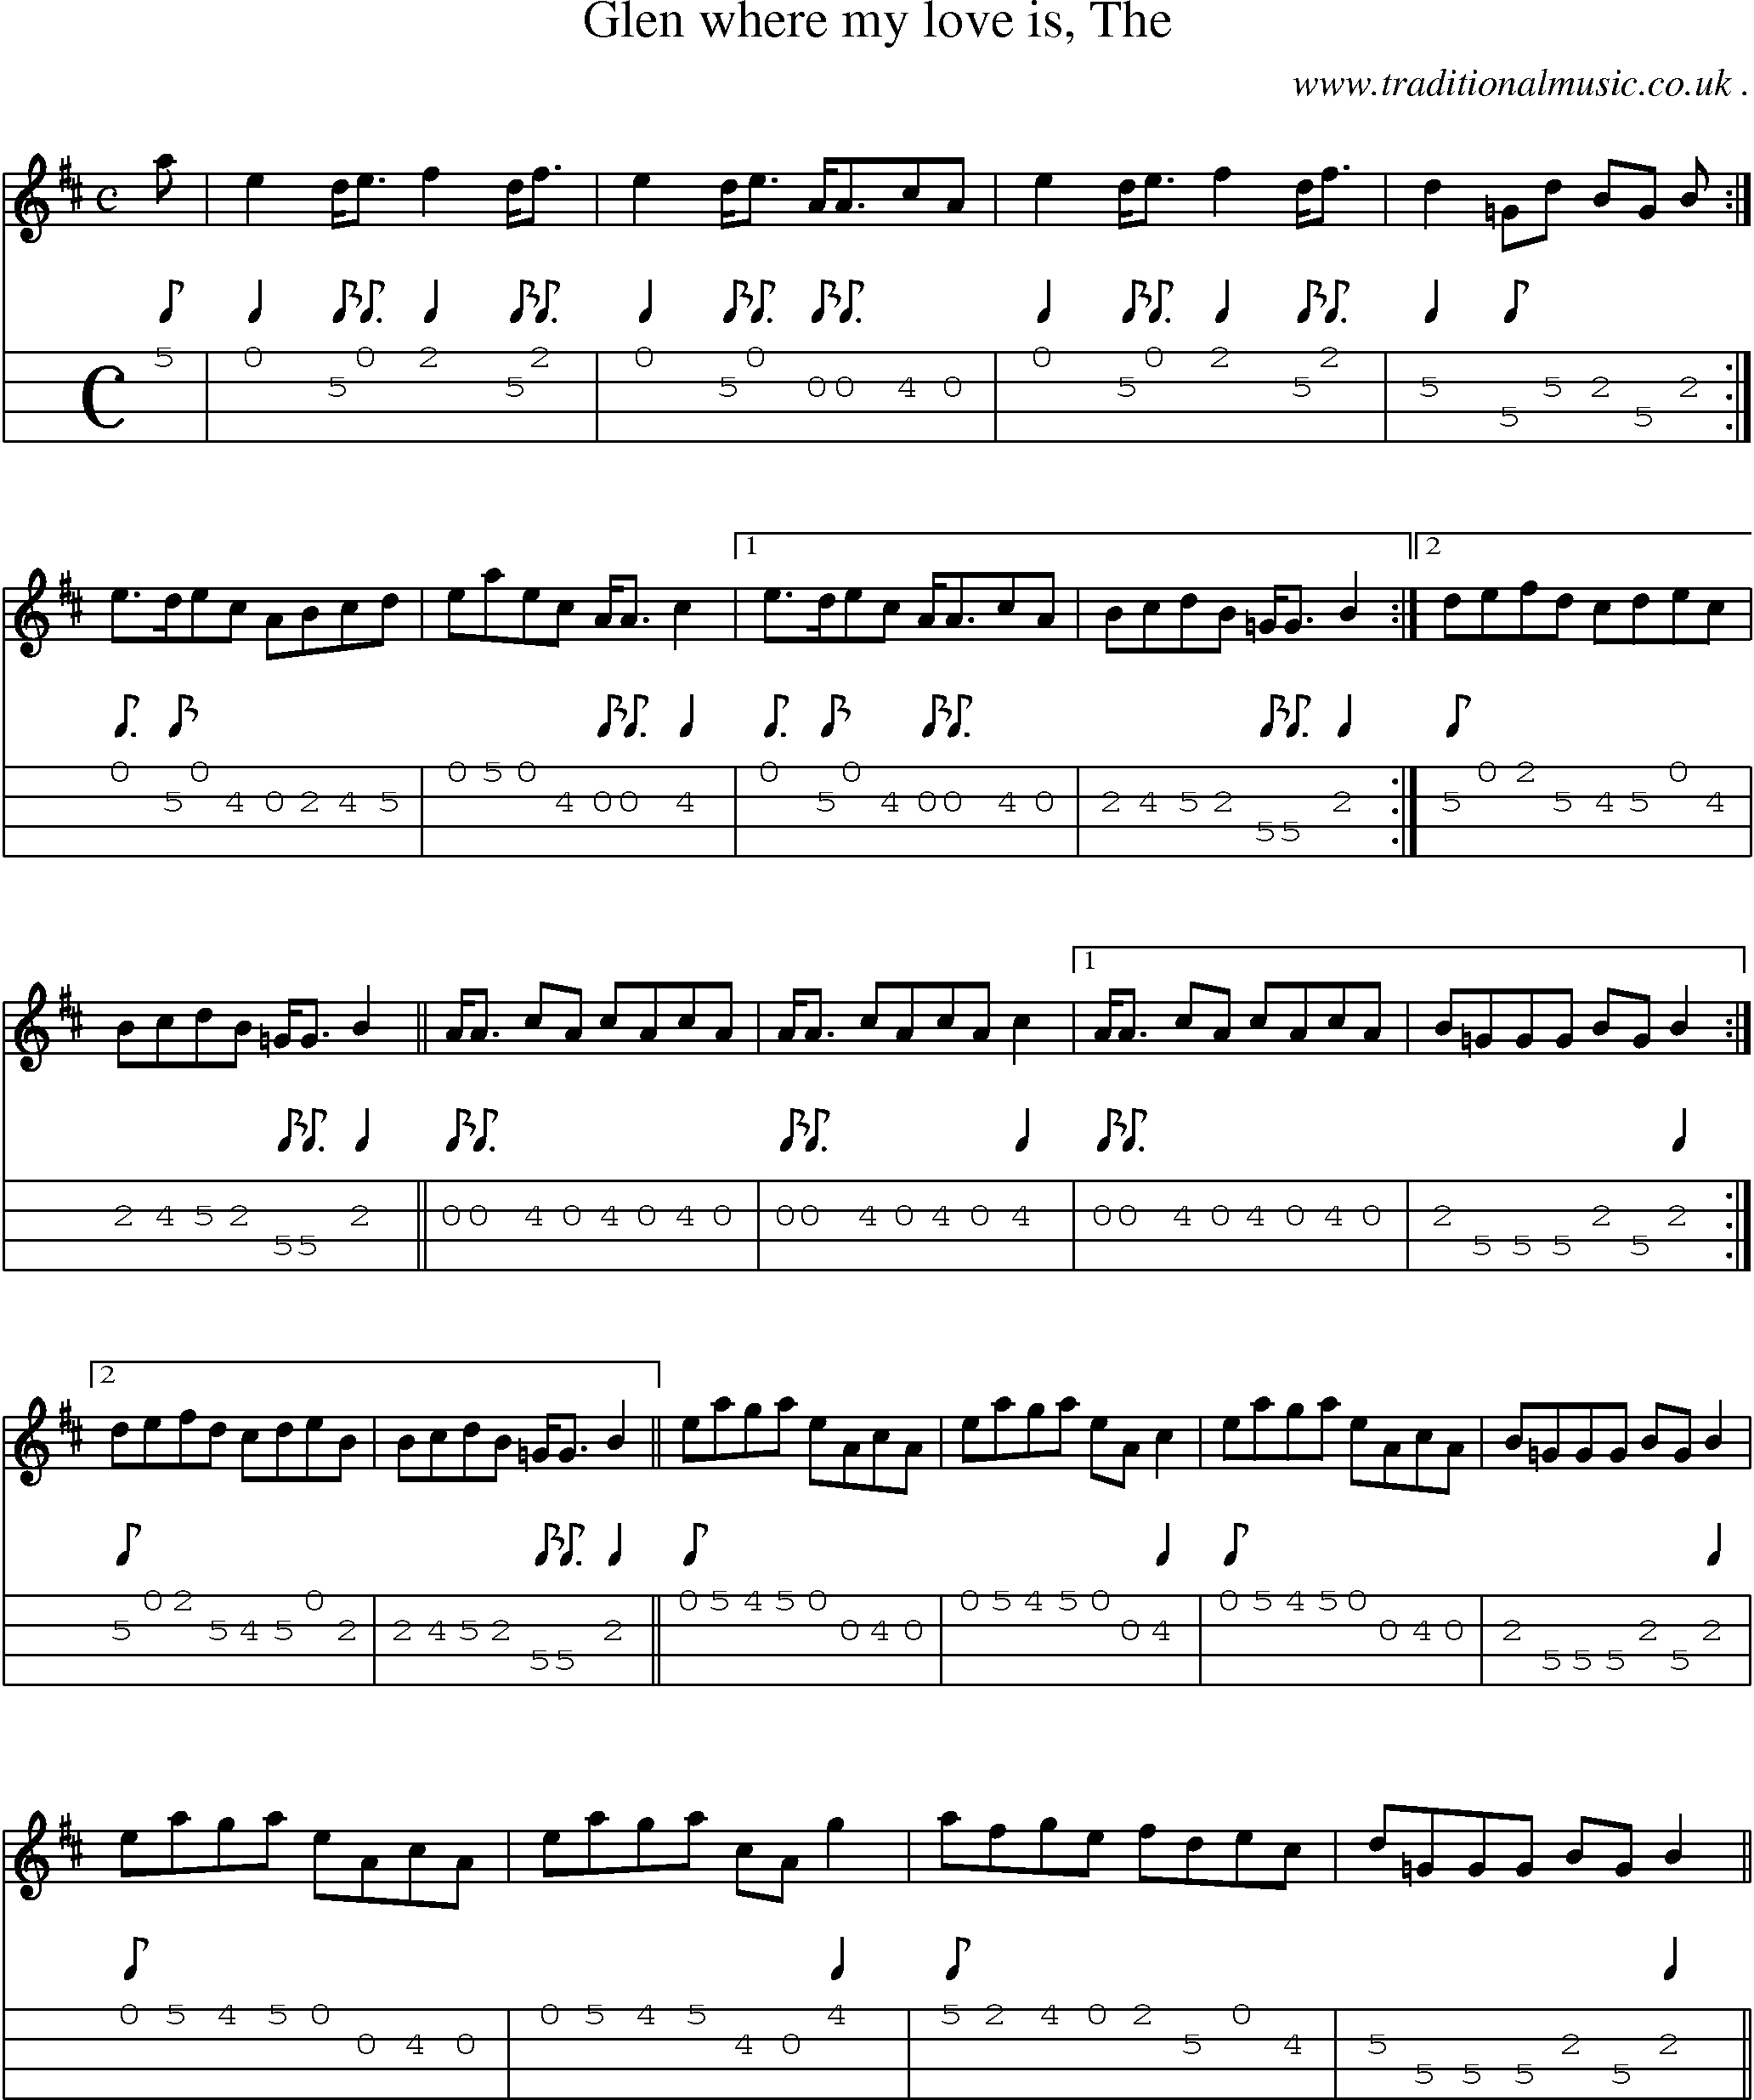 Sheet-music  score, Chords and Mandolin Tabs for Glen Where My Love Is The